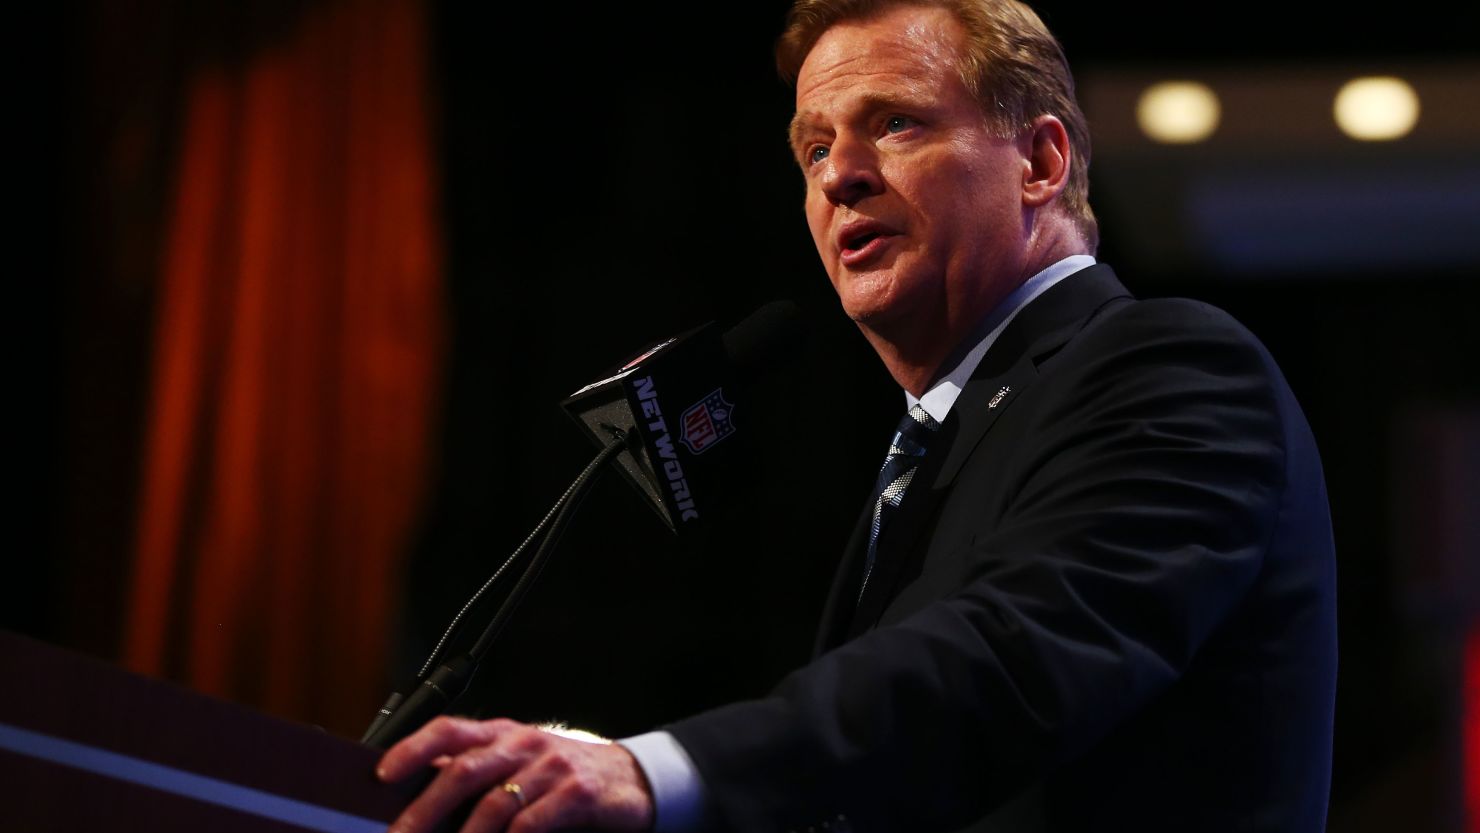 NFL Commissioner Roger Goodell sent out a letter and memo to all NFL owners on aspects of personal conduct.